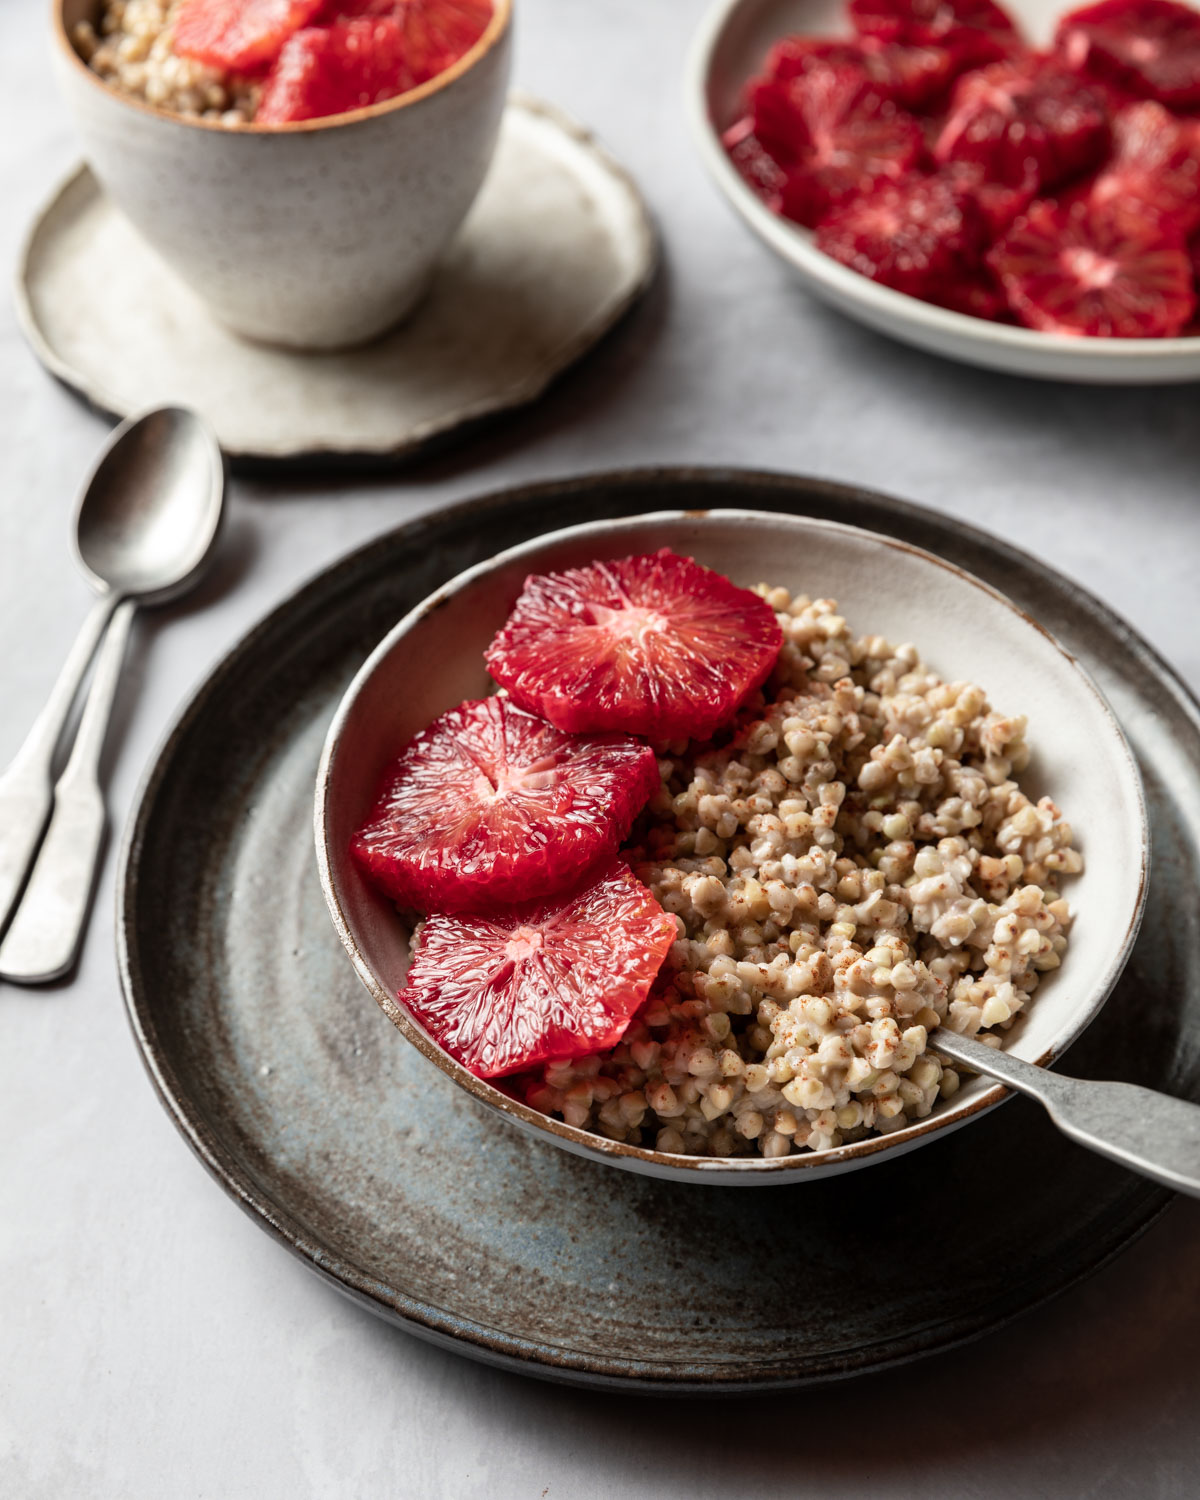 Buckwheat that's been quickly simmered in coconut milk and maple syrup is topped off with slices of blood oranges to make a quick and hearty breakfast.